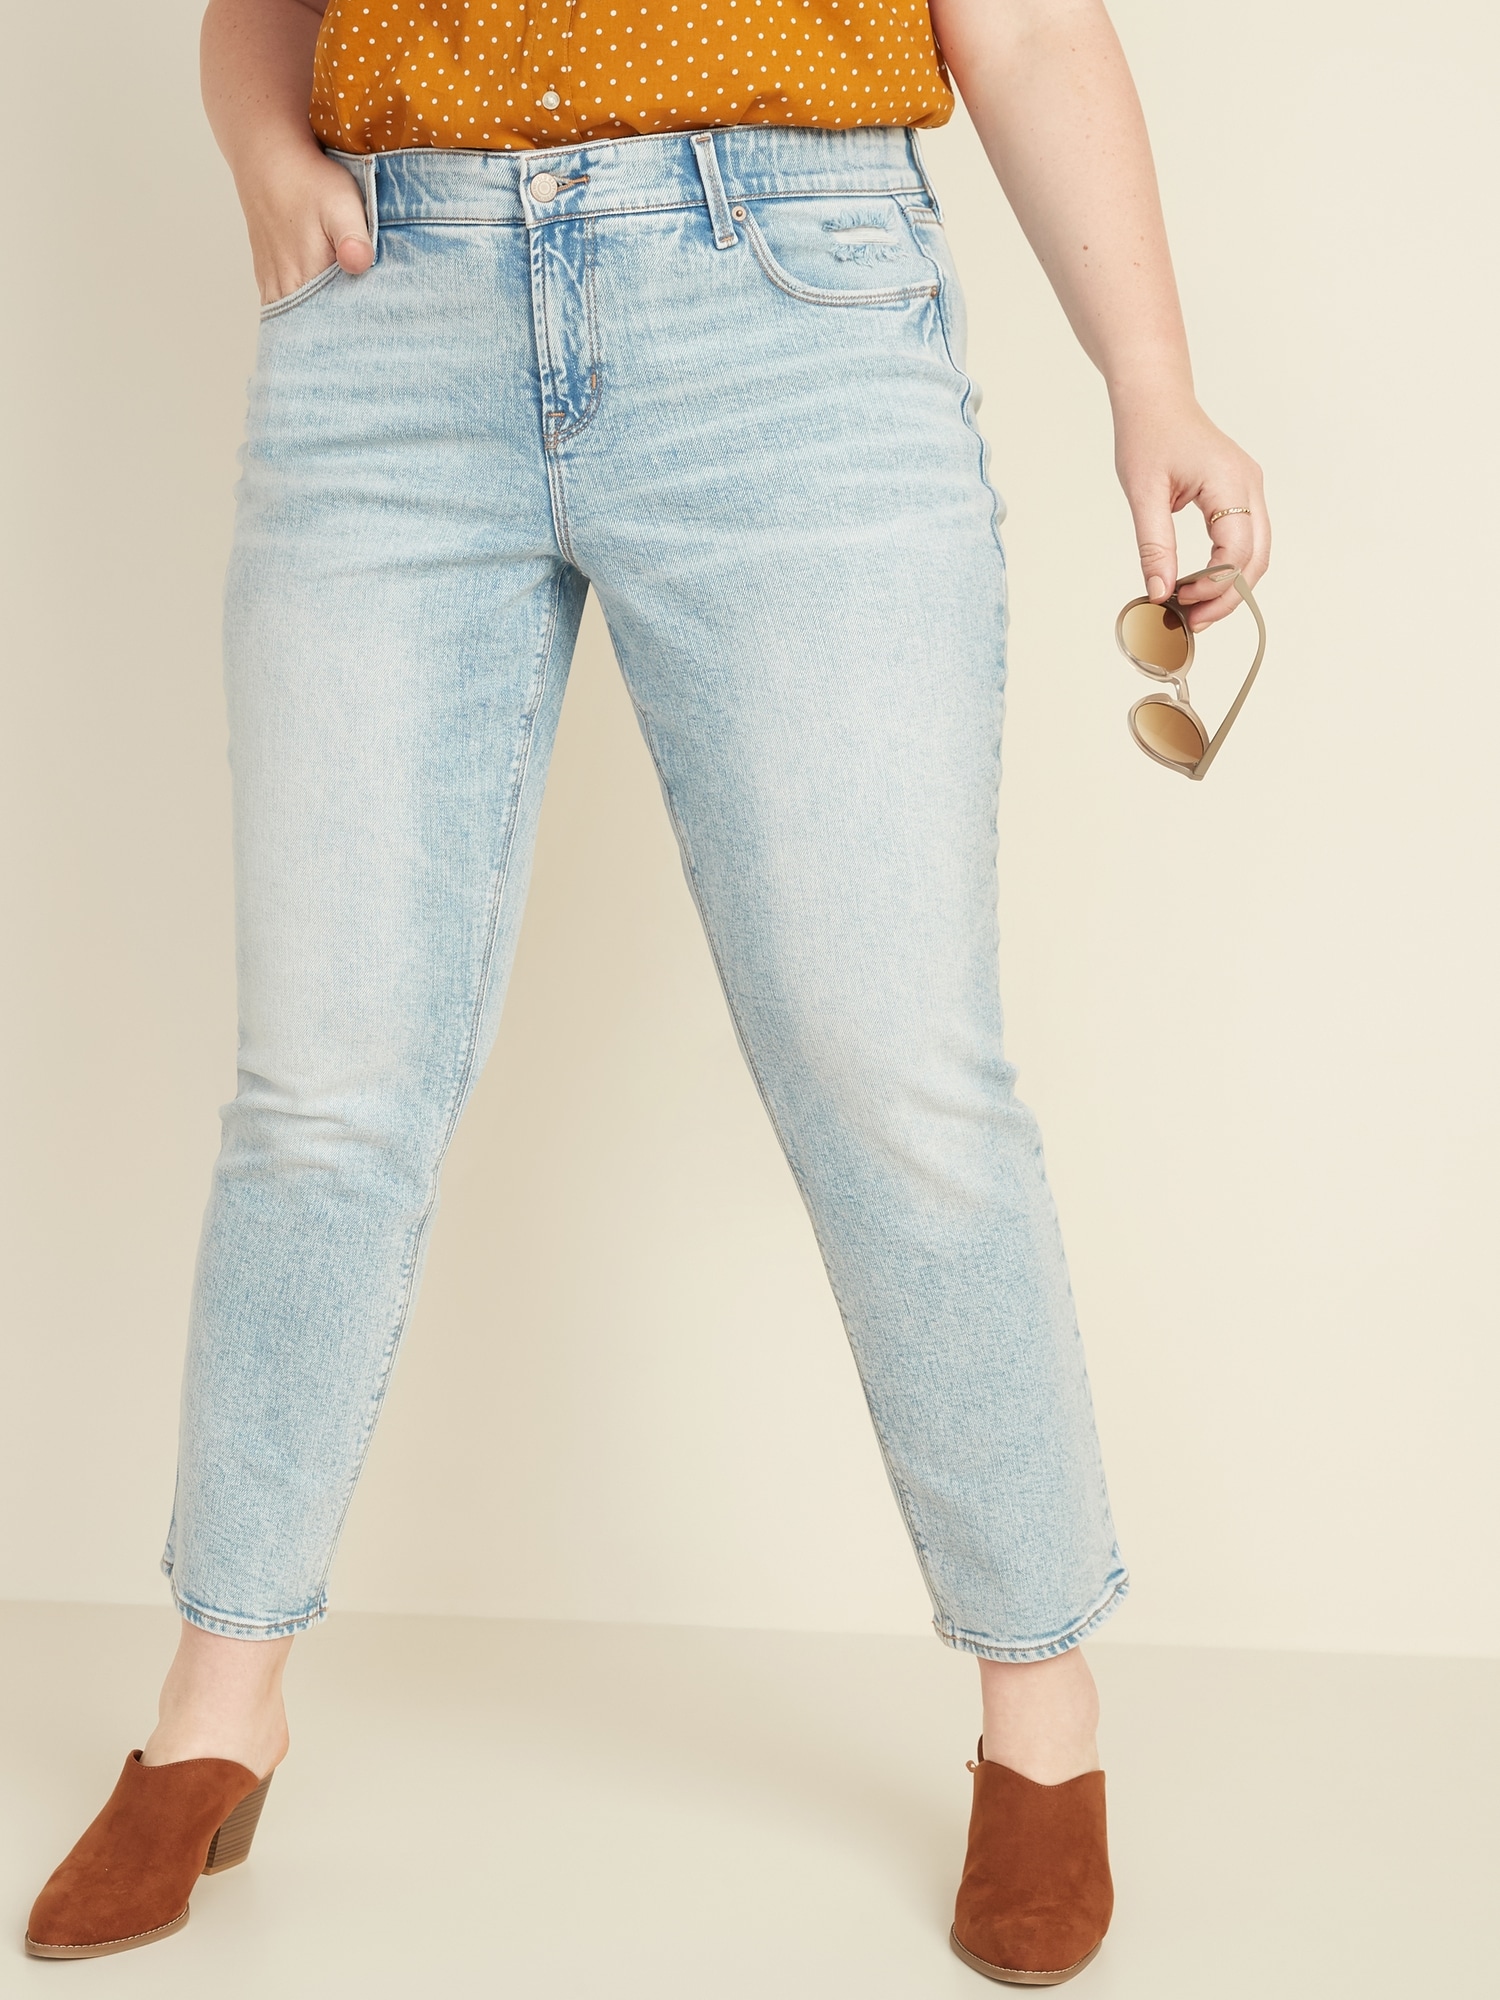 high rise old navy jeans